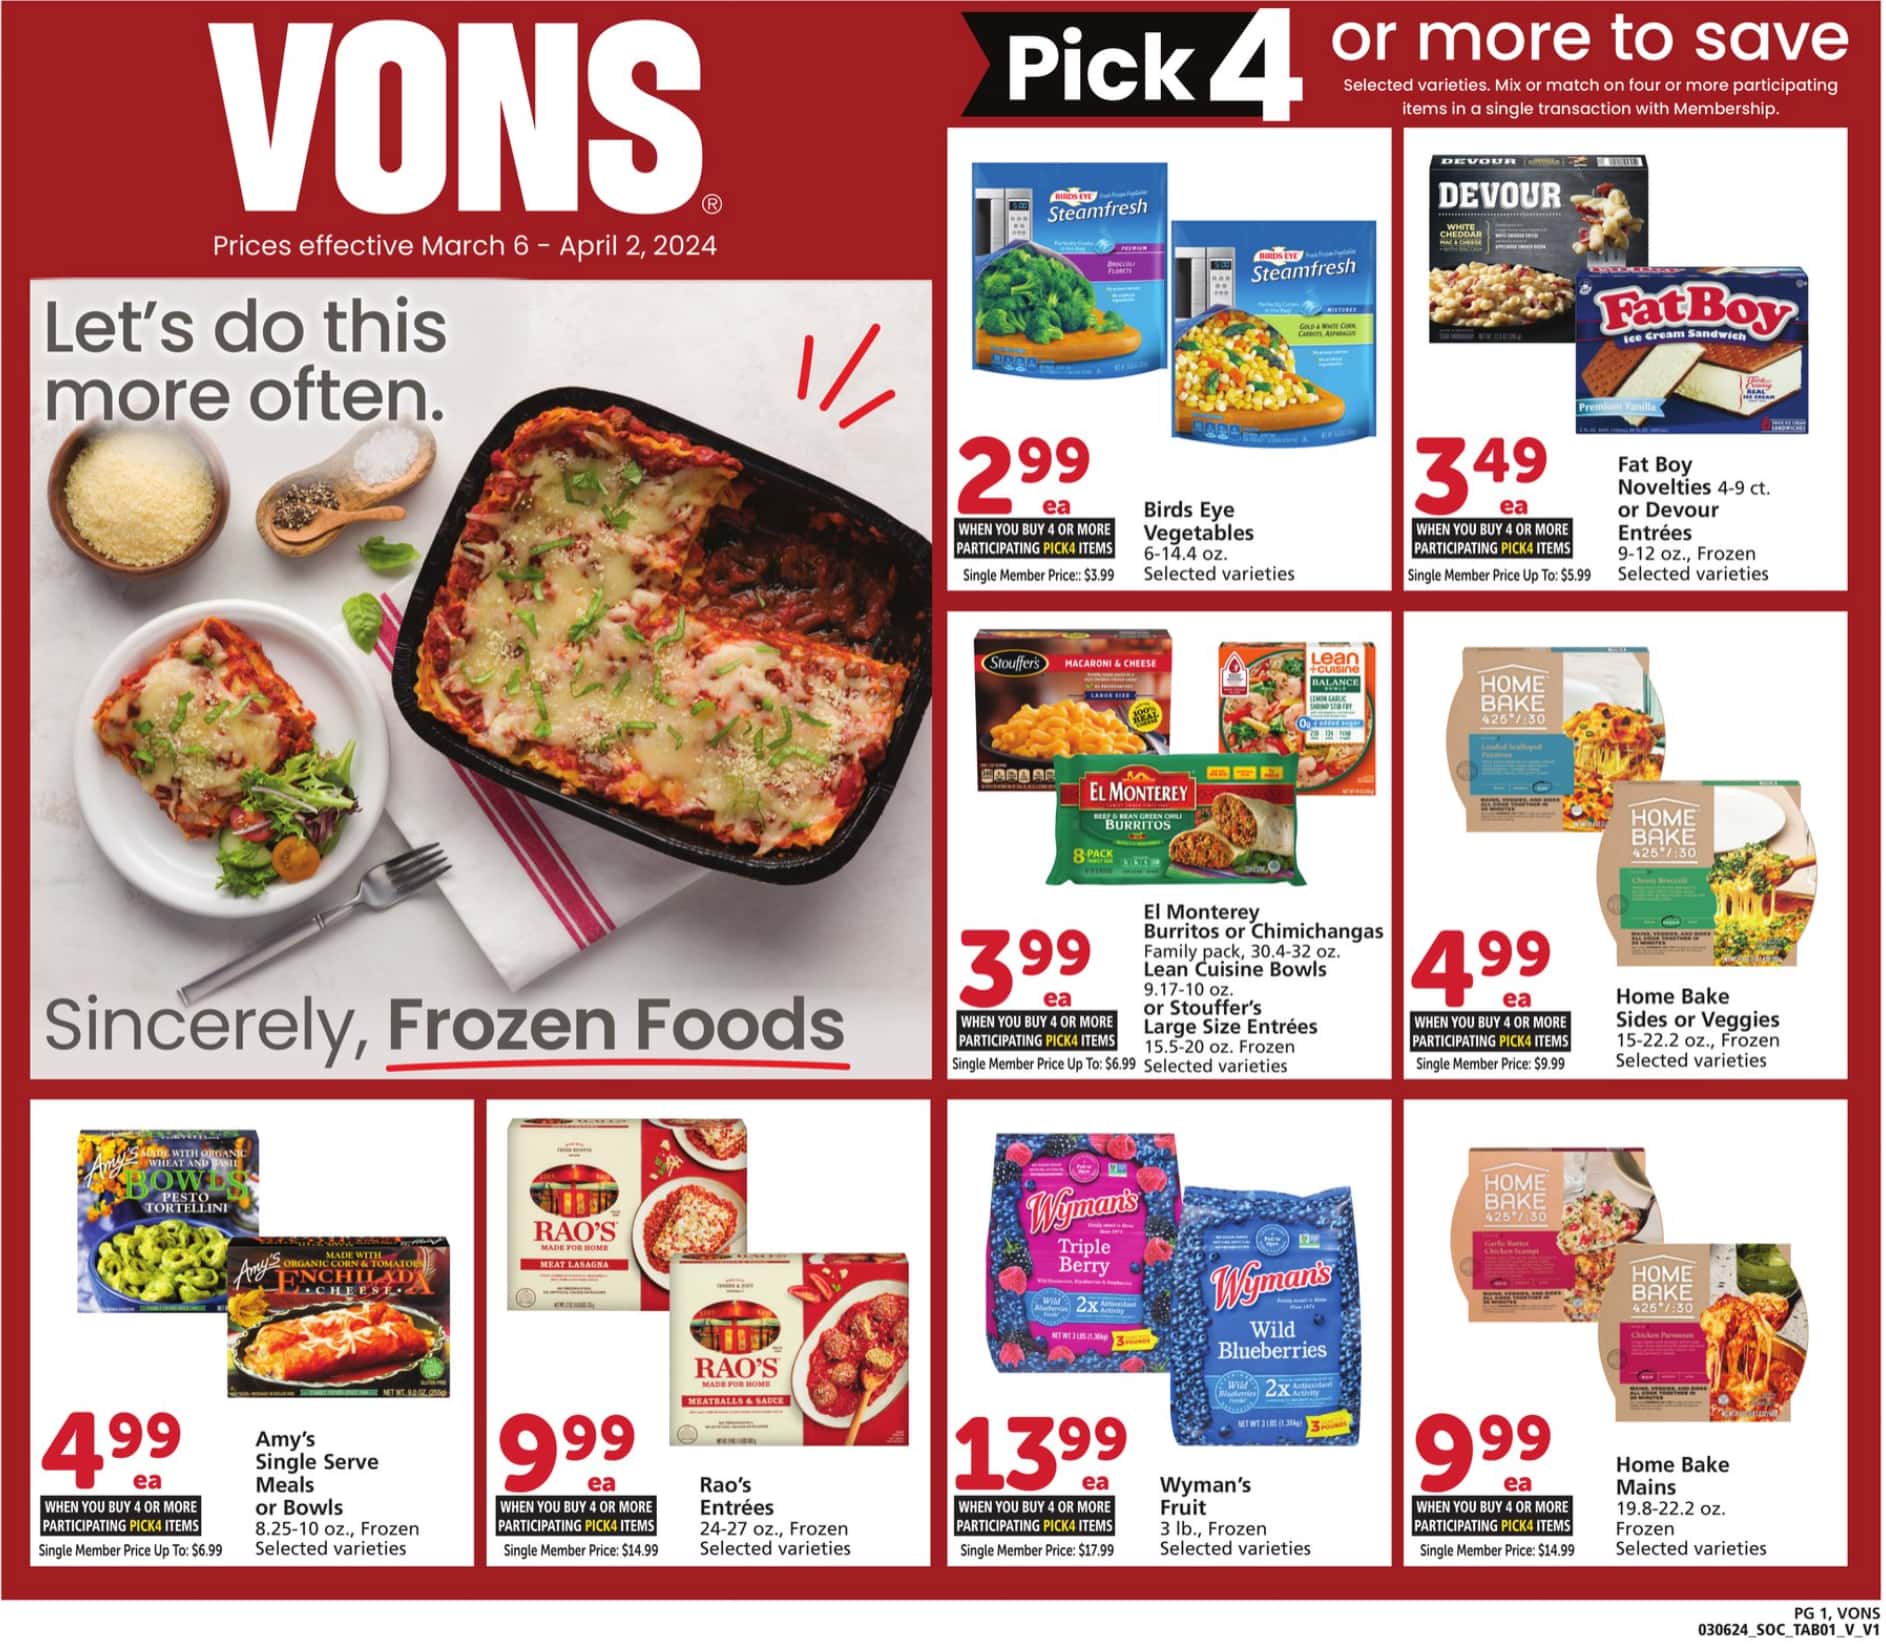 Vons_weekly_ad_030524_01